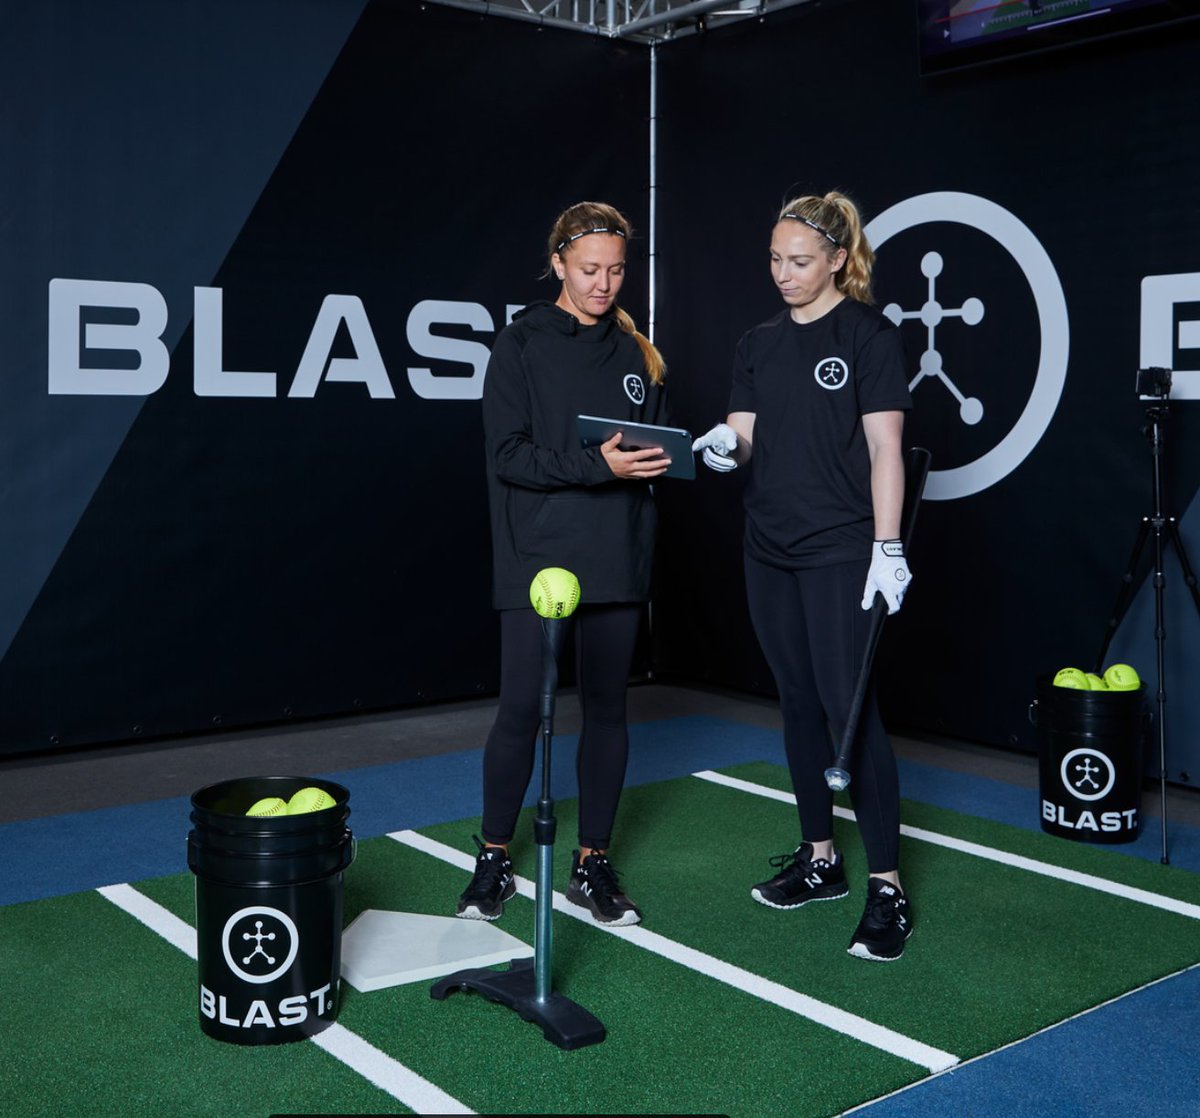 𝐂𝐚𝐥𝐥𝐢𝐧𝐠 𝐚𝐥𝐥 𝐜𝐨𝐚𝐜𝐡𝐞𝐬! 🗣 Want to learn how to use tech to craft your hitting plans, workout regimen, and nutrition focus? ⁣ ⁣ Check out our free e-book: blastmotion.com/resources/soft…